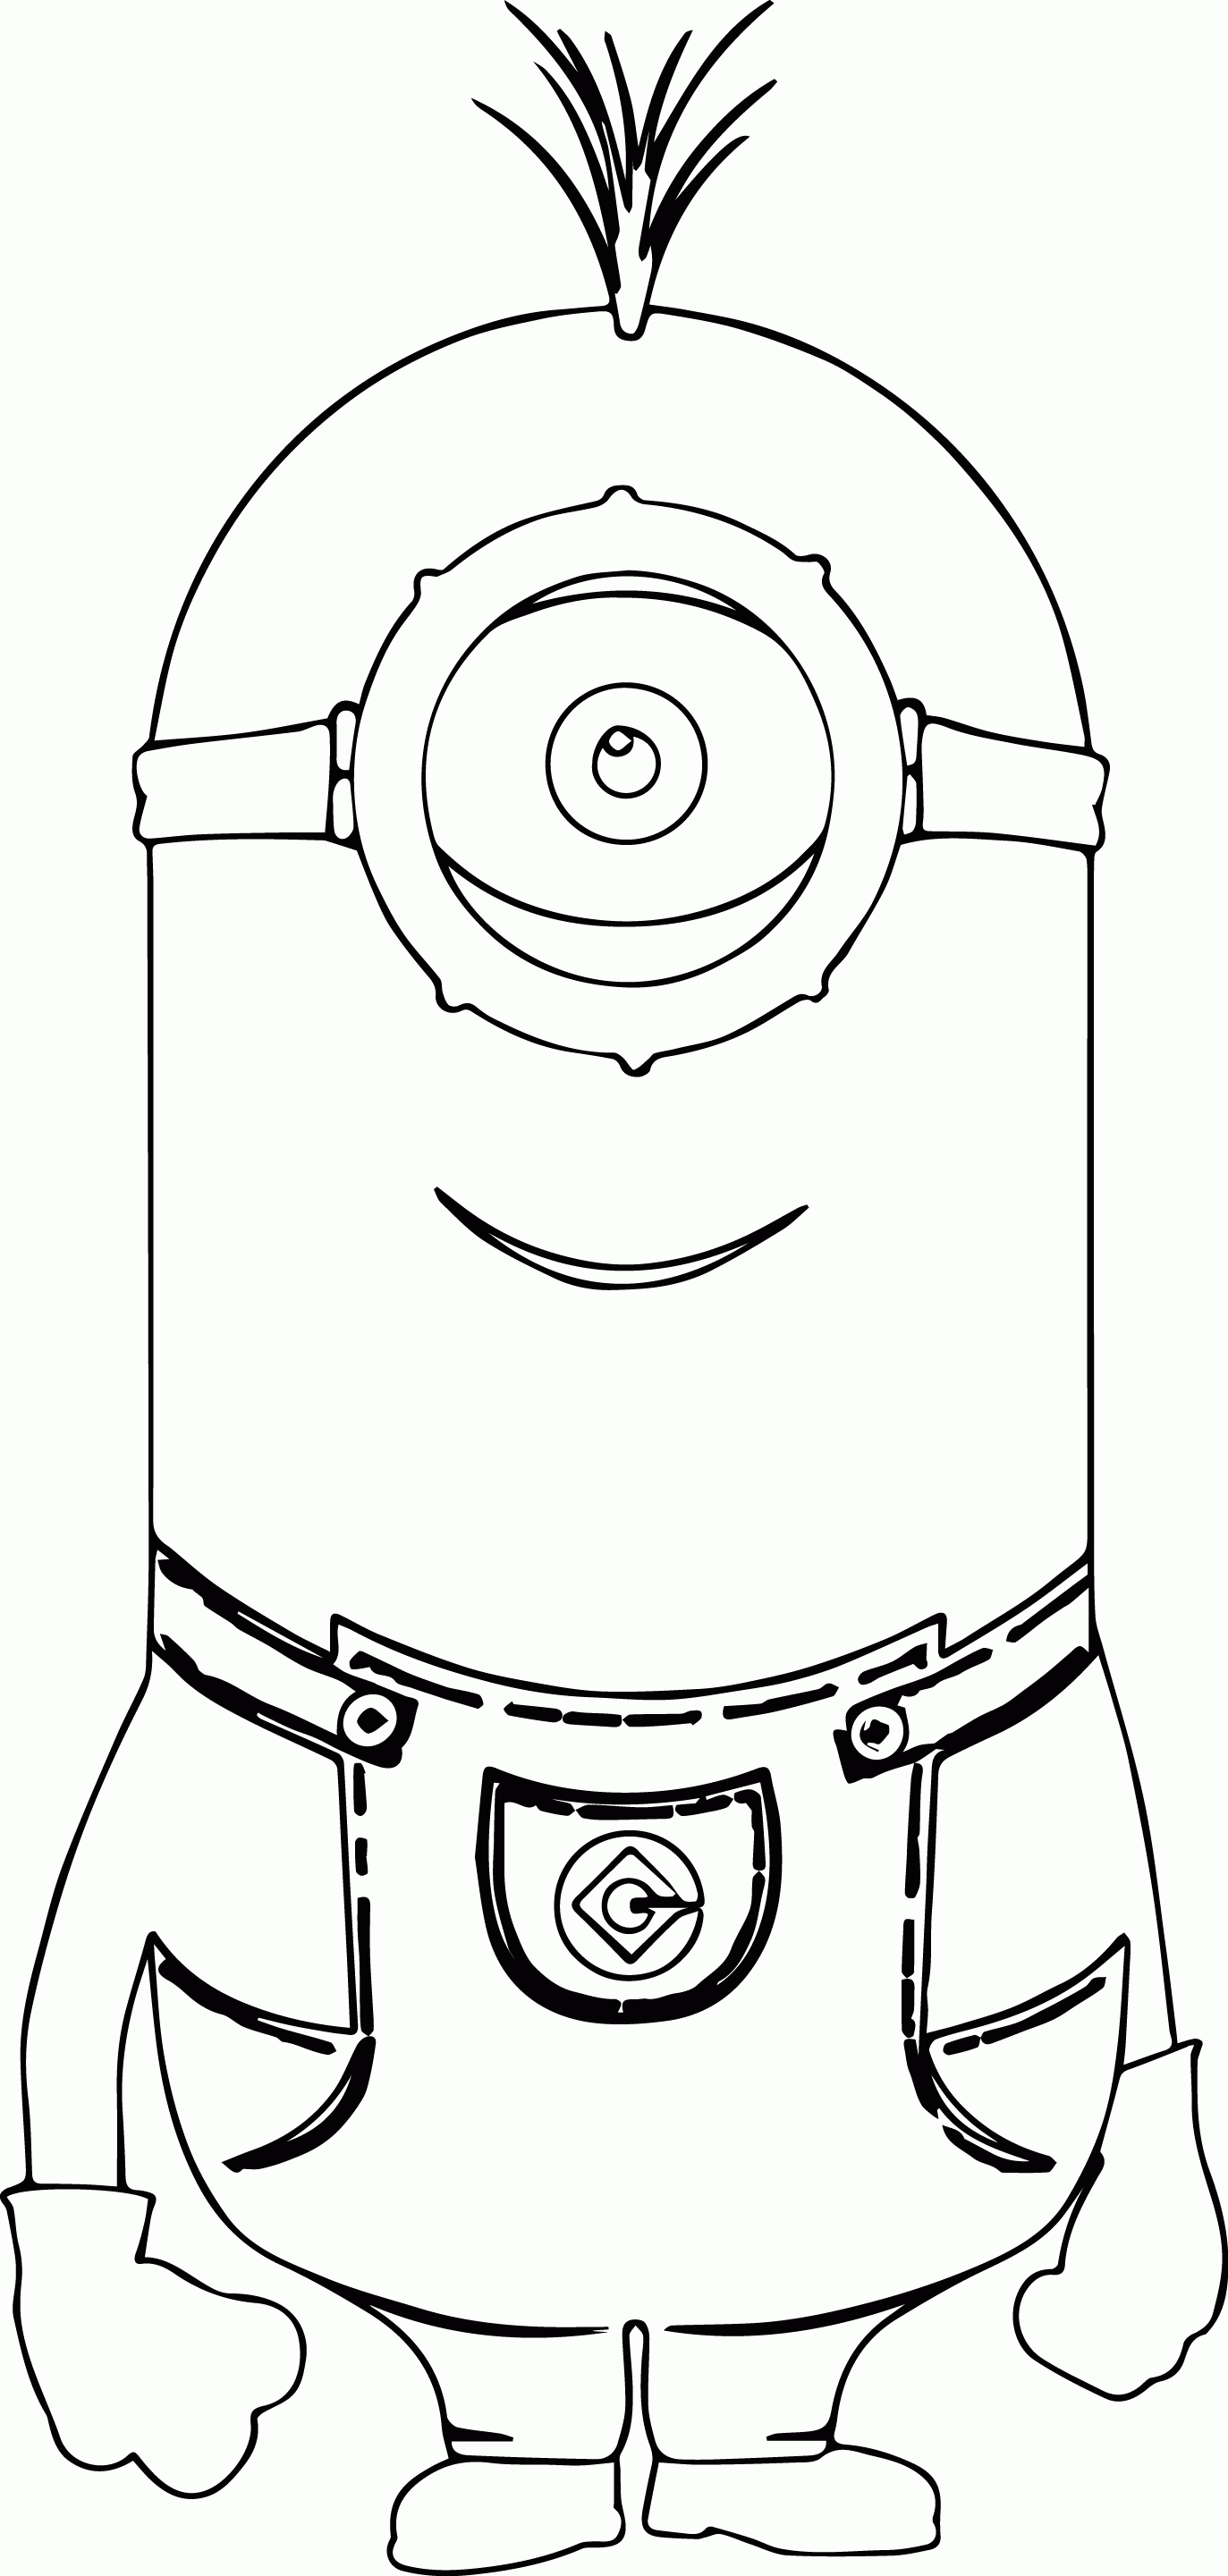 Minion Coloring Pages | Wecoloringpage